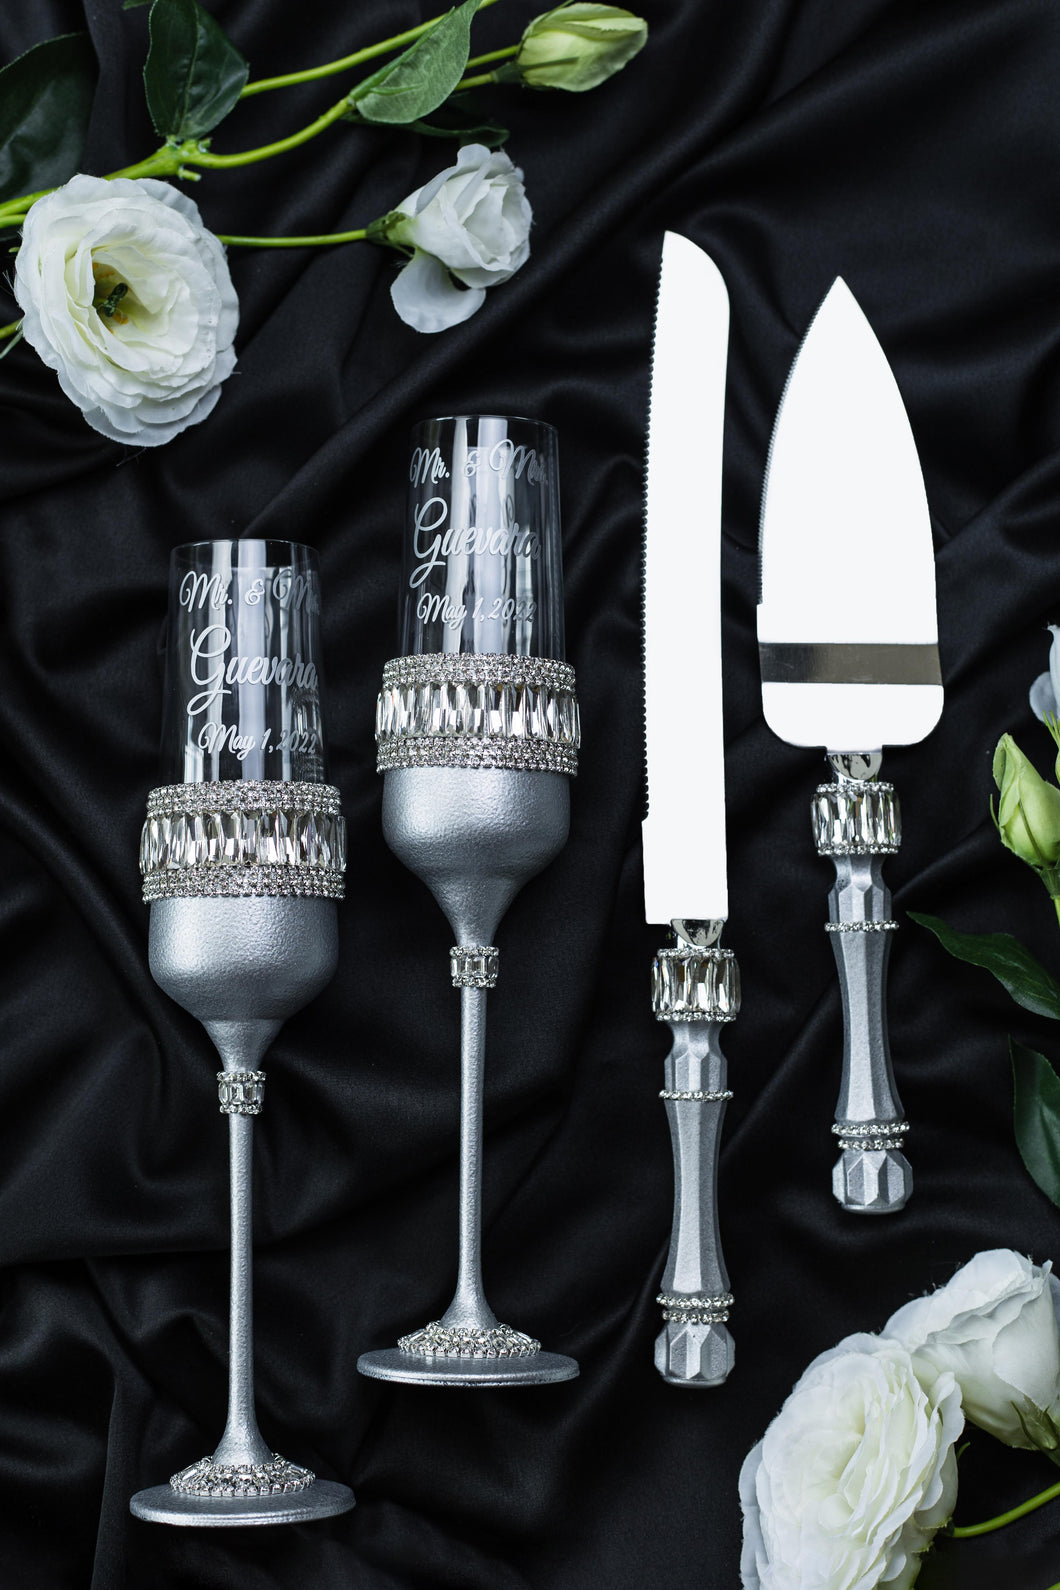 Gray wedding cake cutting set, wedding glasses for bride and groom